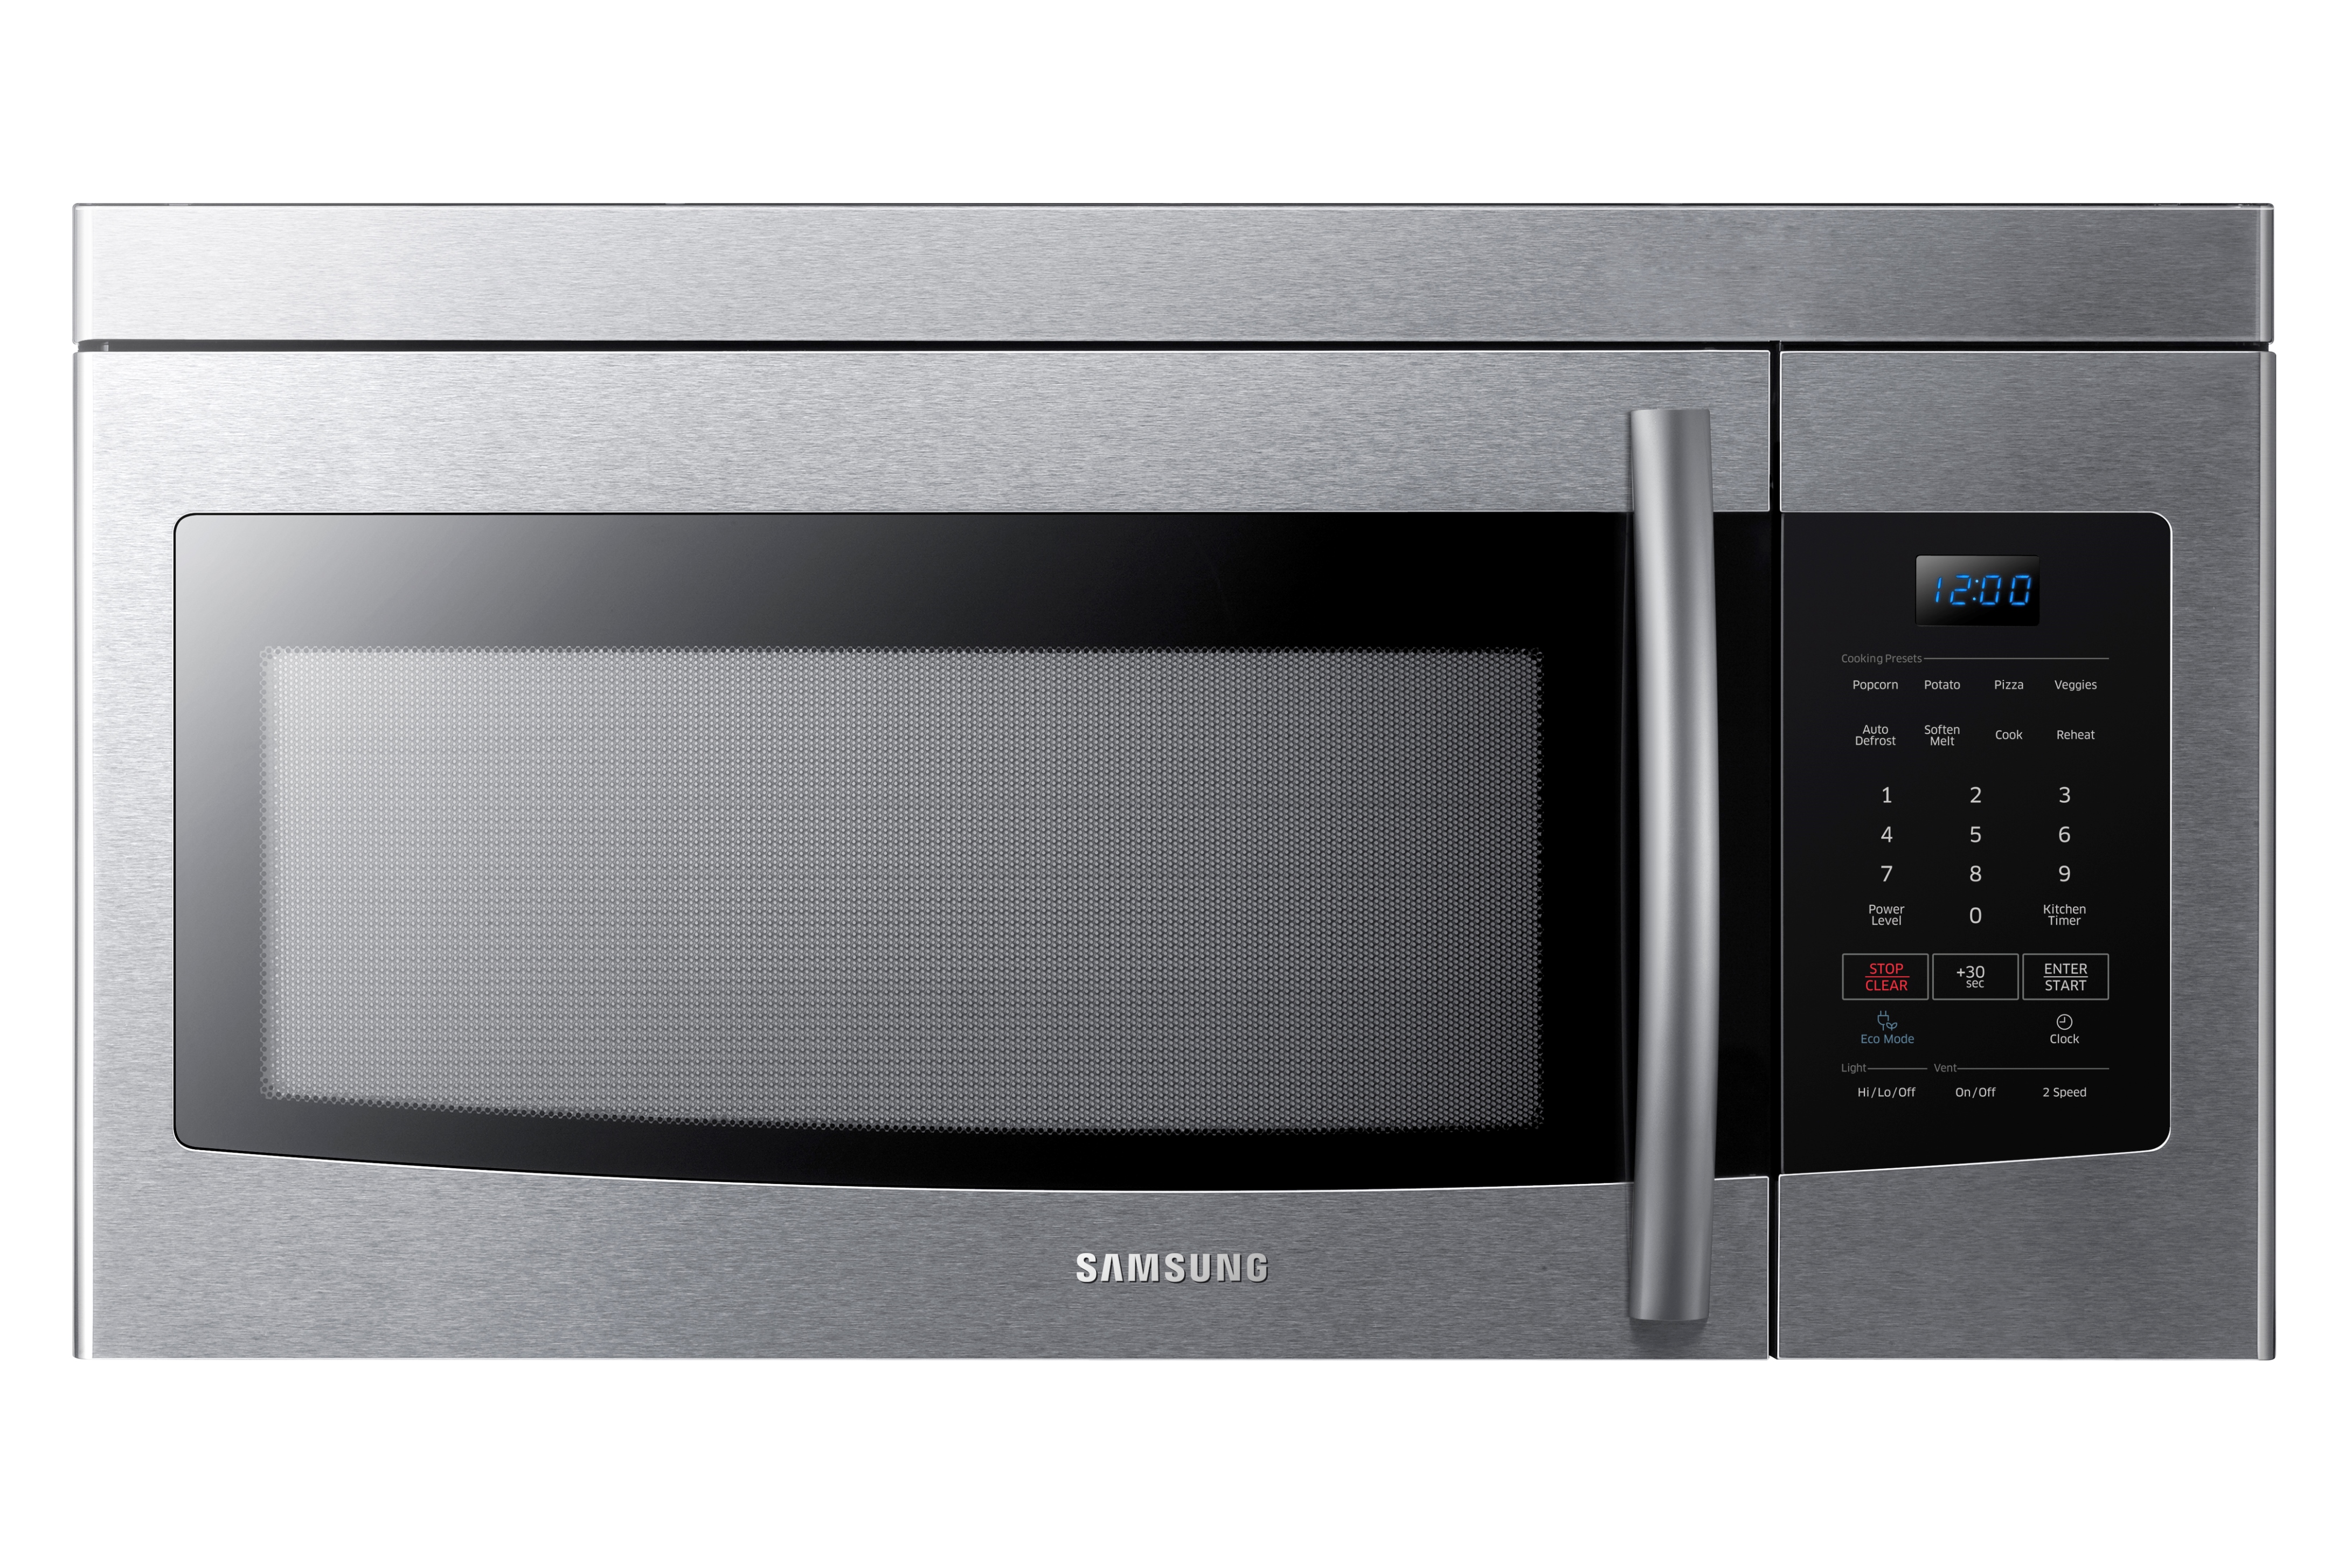 Samsung ME16K3000AS/AA 1.6 cu. ft. Over-the-Range Microwave - Stainless